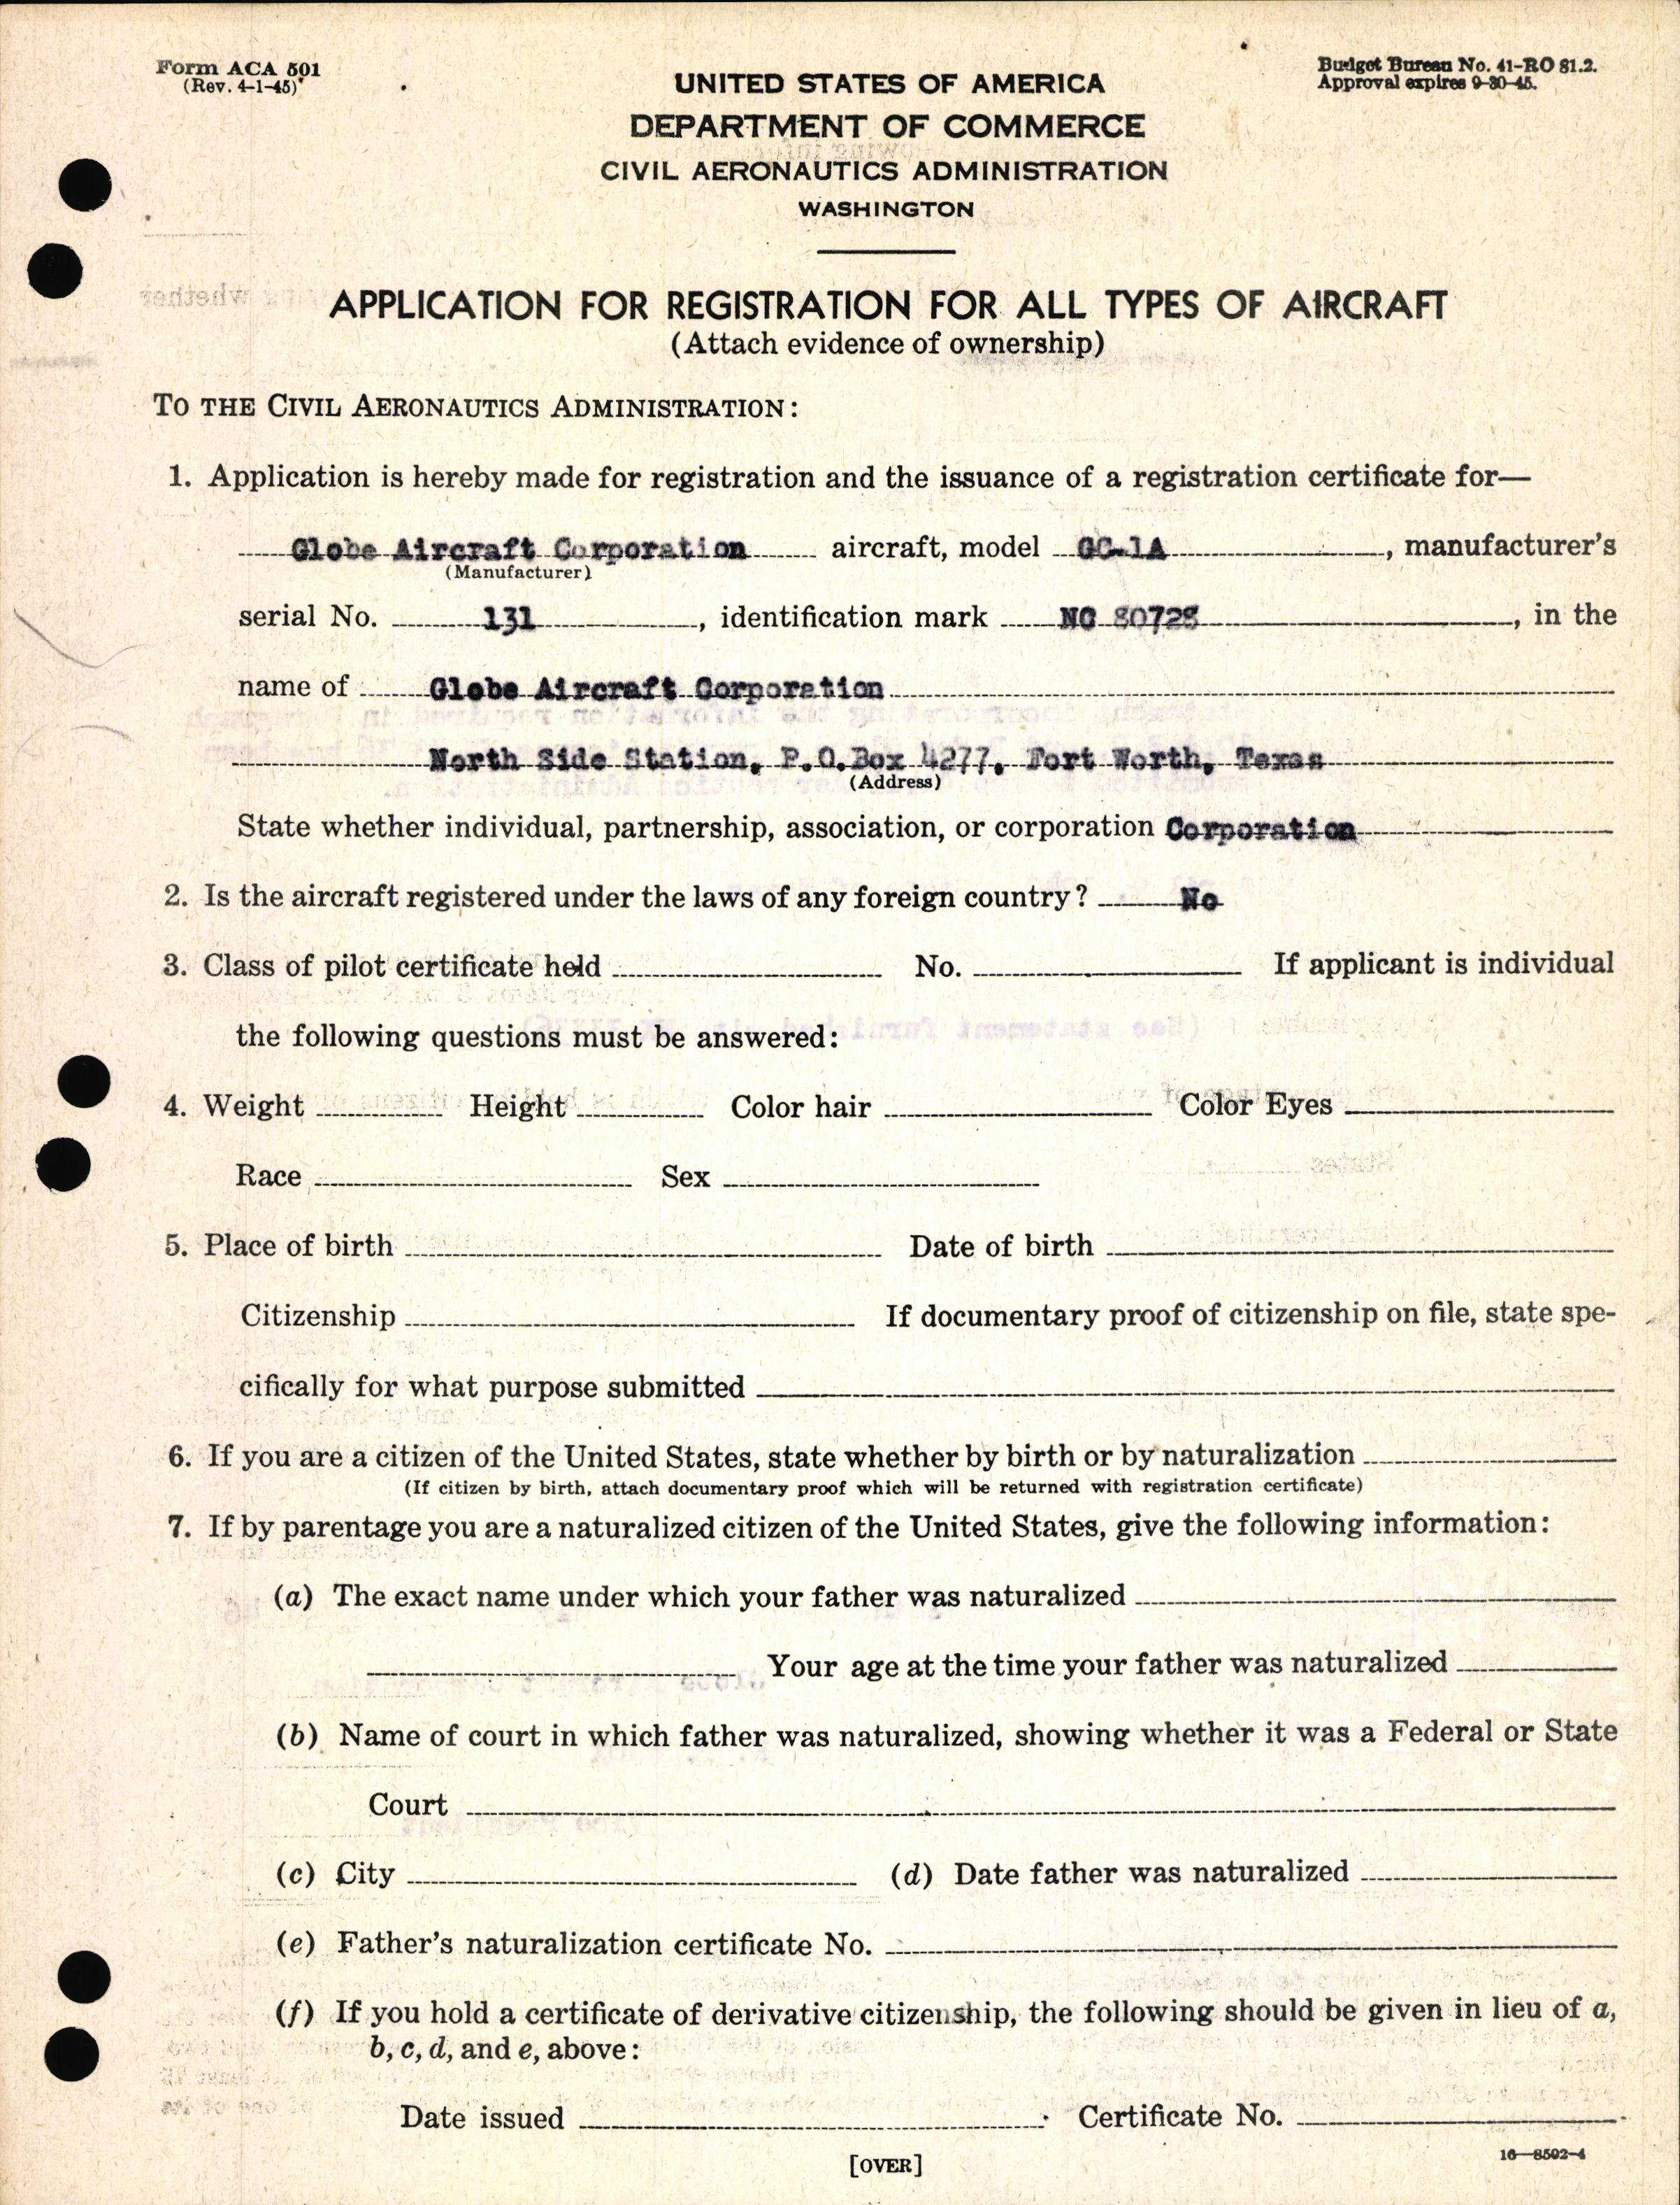 Sample page 7 from AirCorps Library document: Technical Information for Serial Number 131